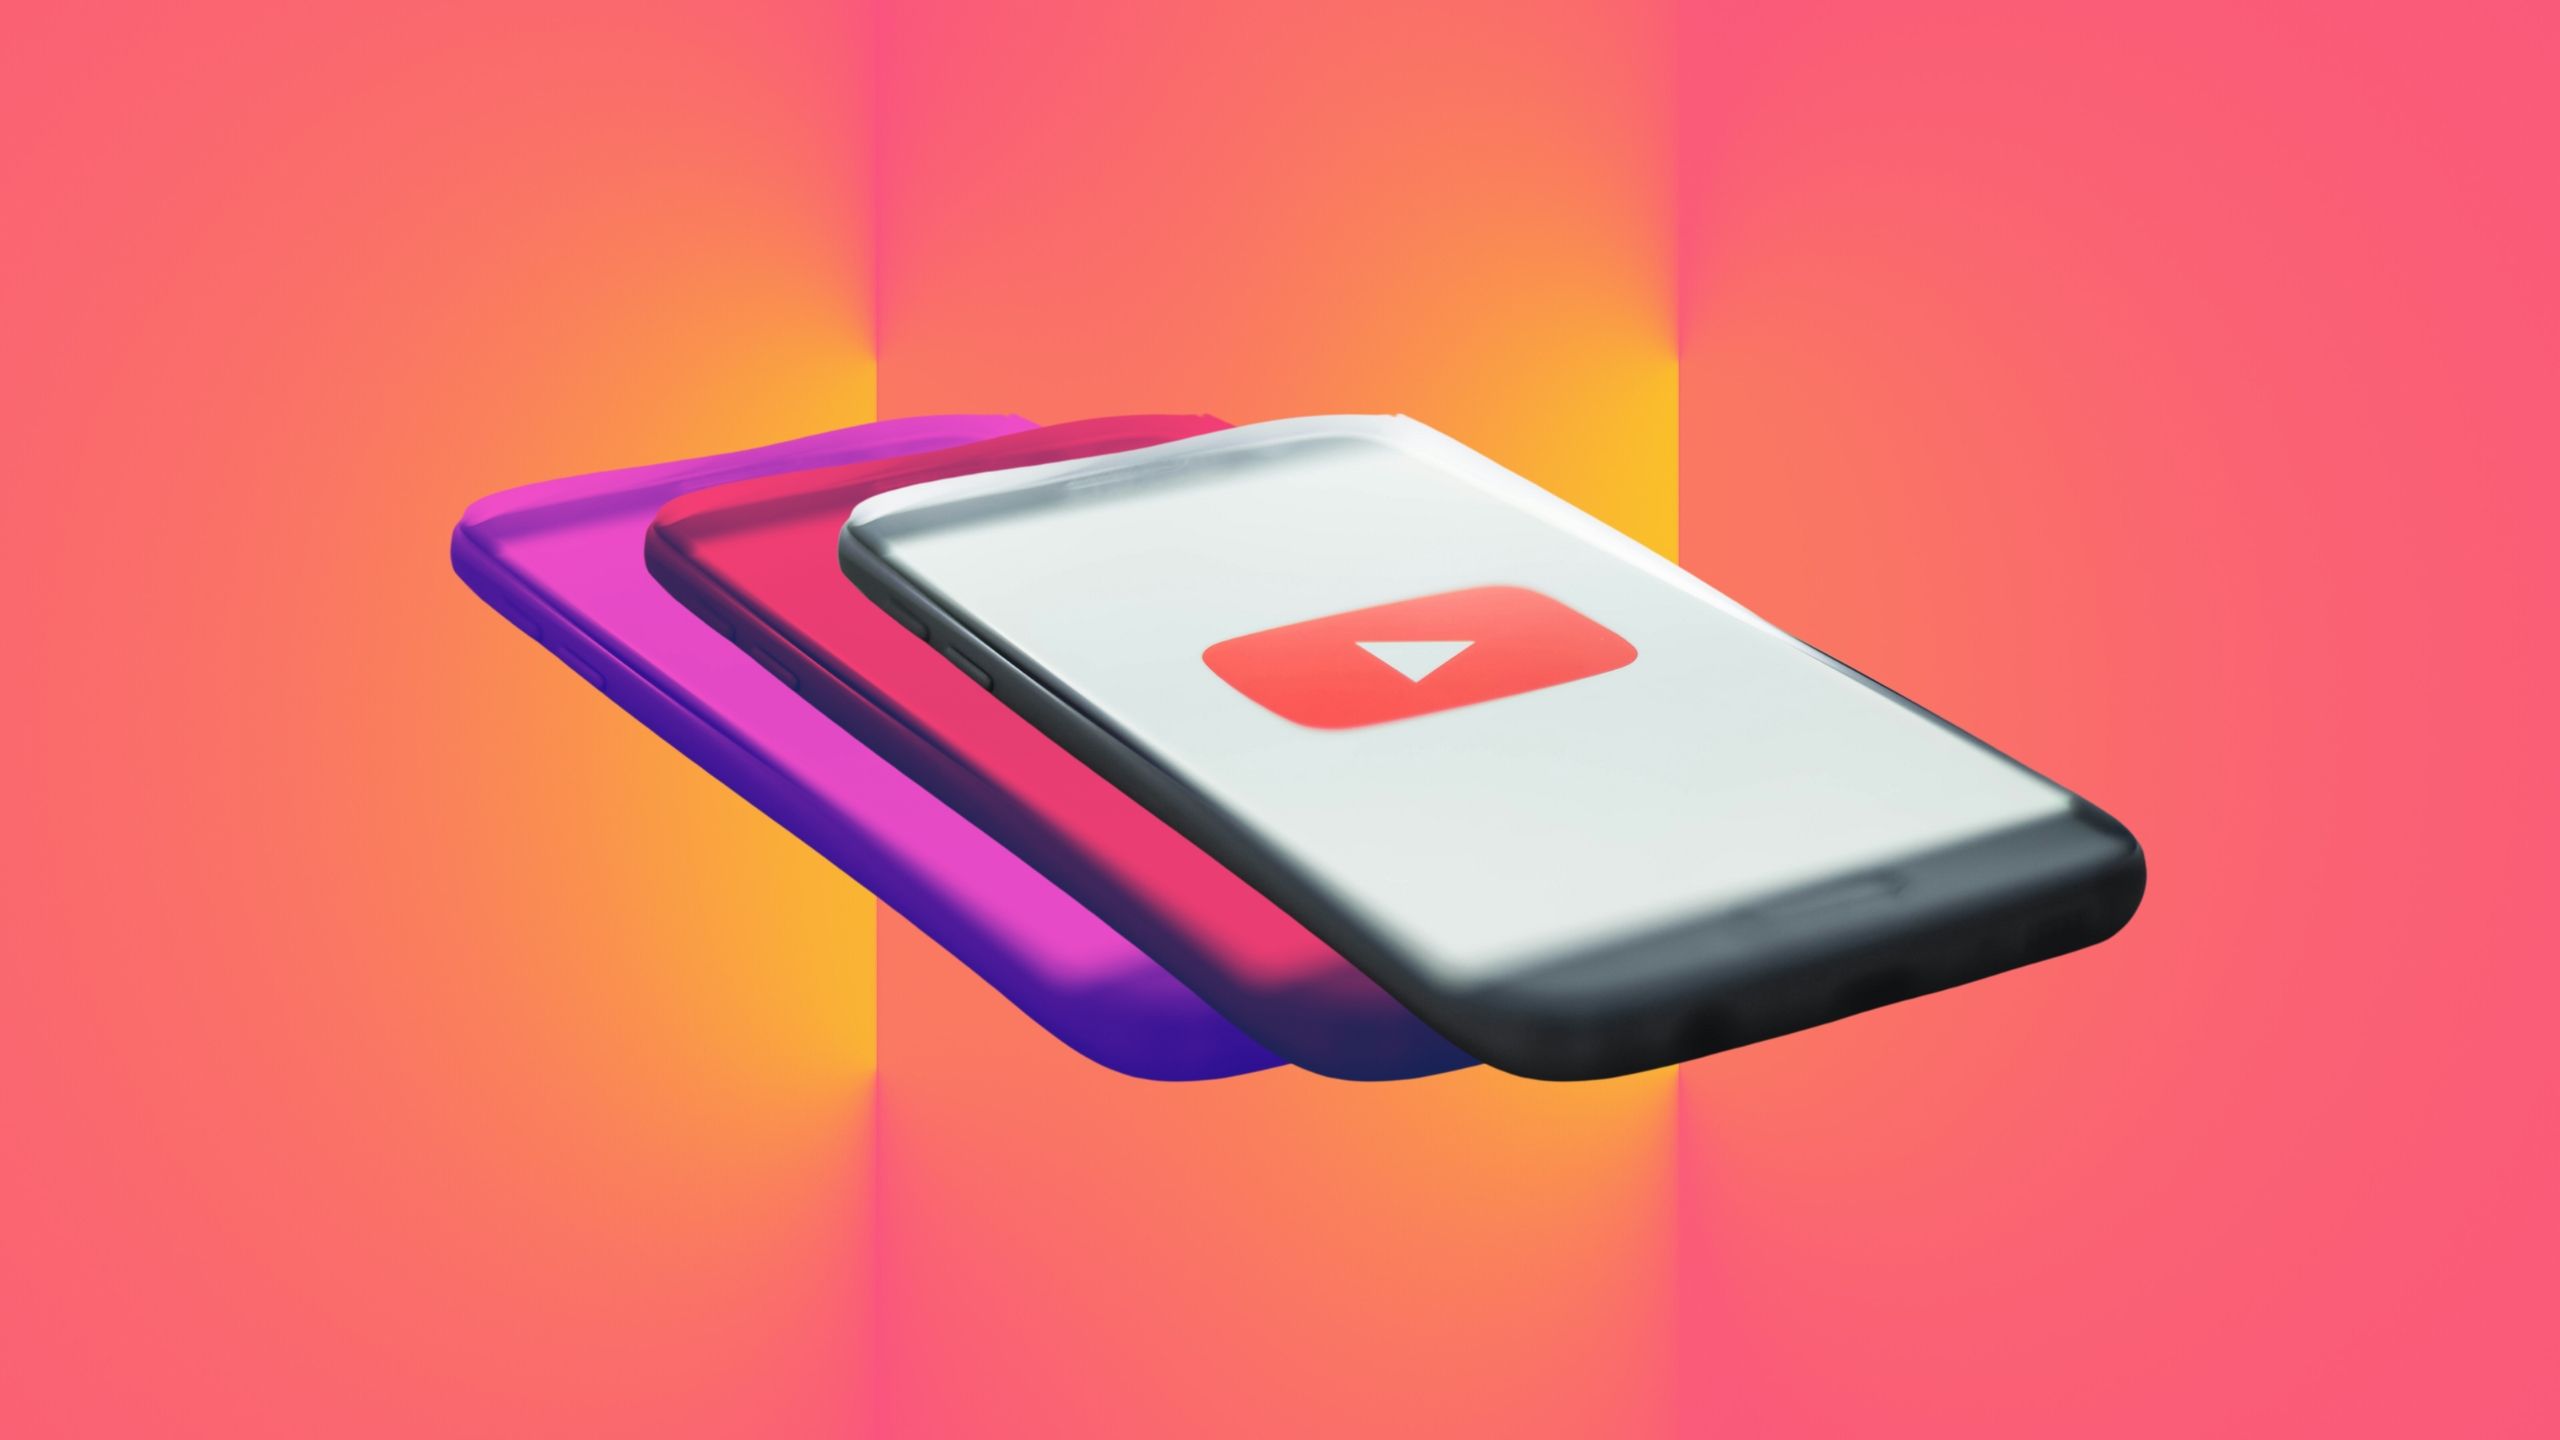 YouTube logo on a mobile phone. 